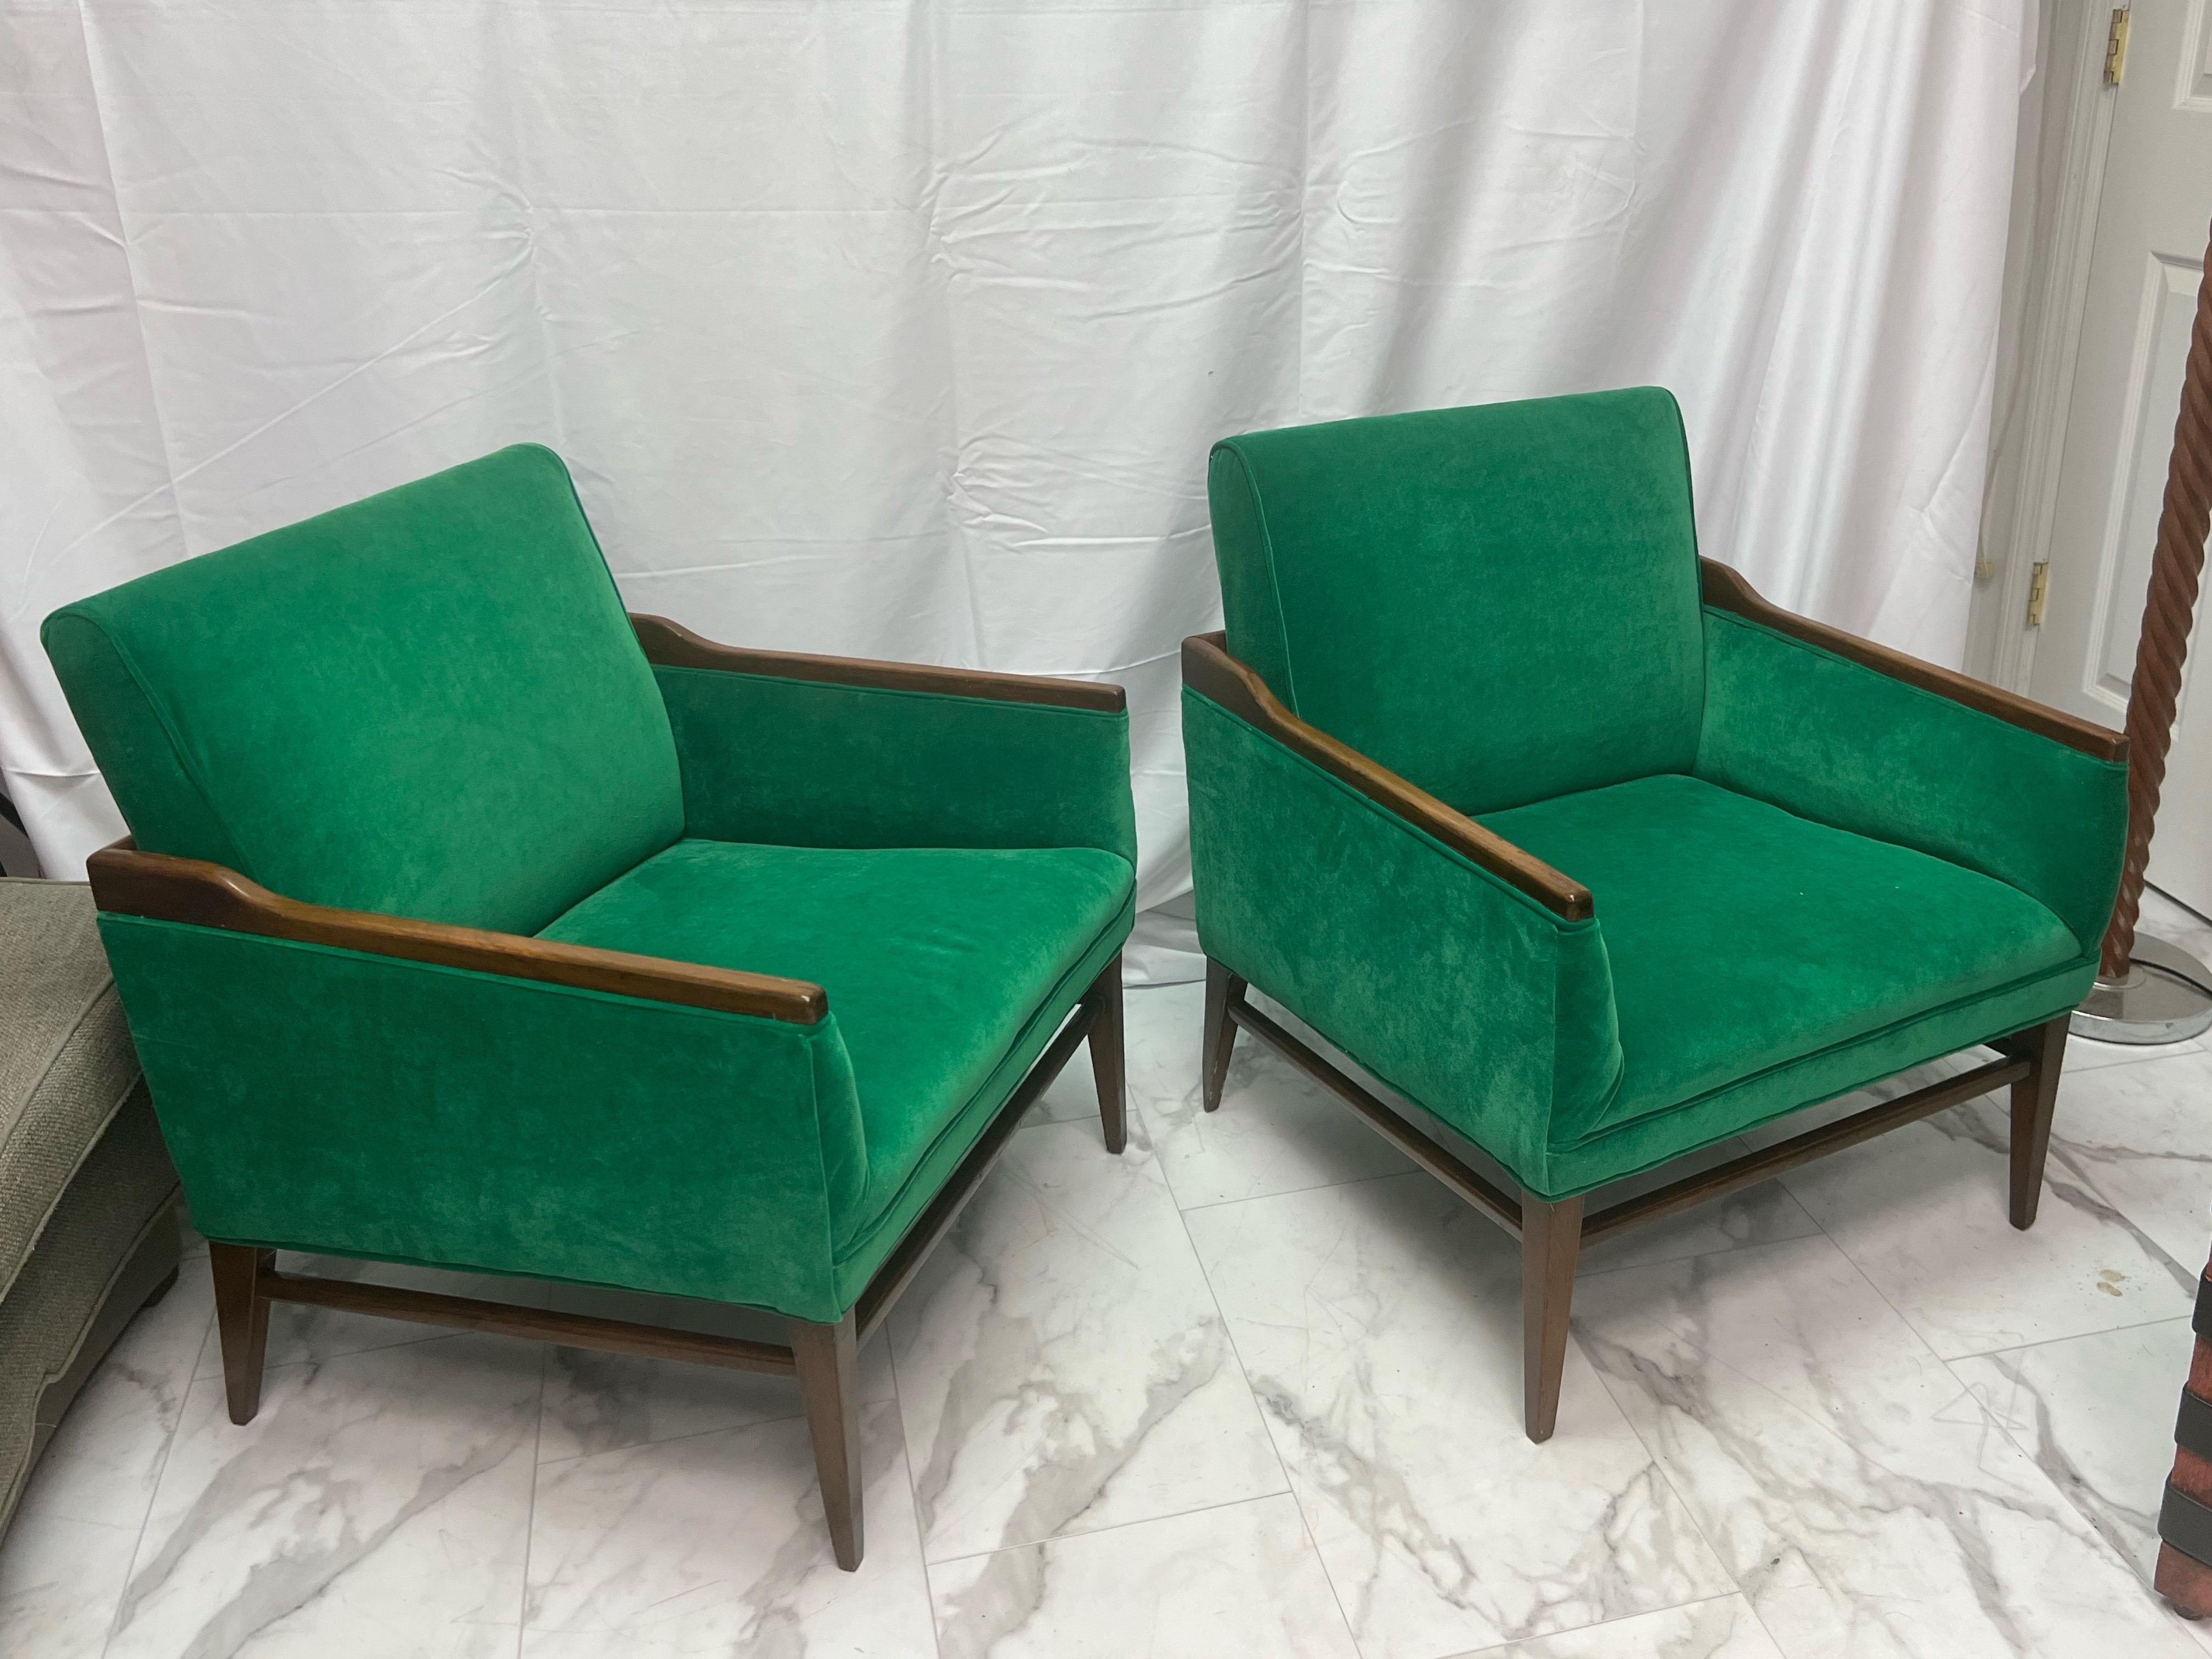 1950’s Walnut and Green Velvet Low Profile Chairs - a Pair In Good Condition For Sale In Charleston, SC